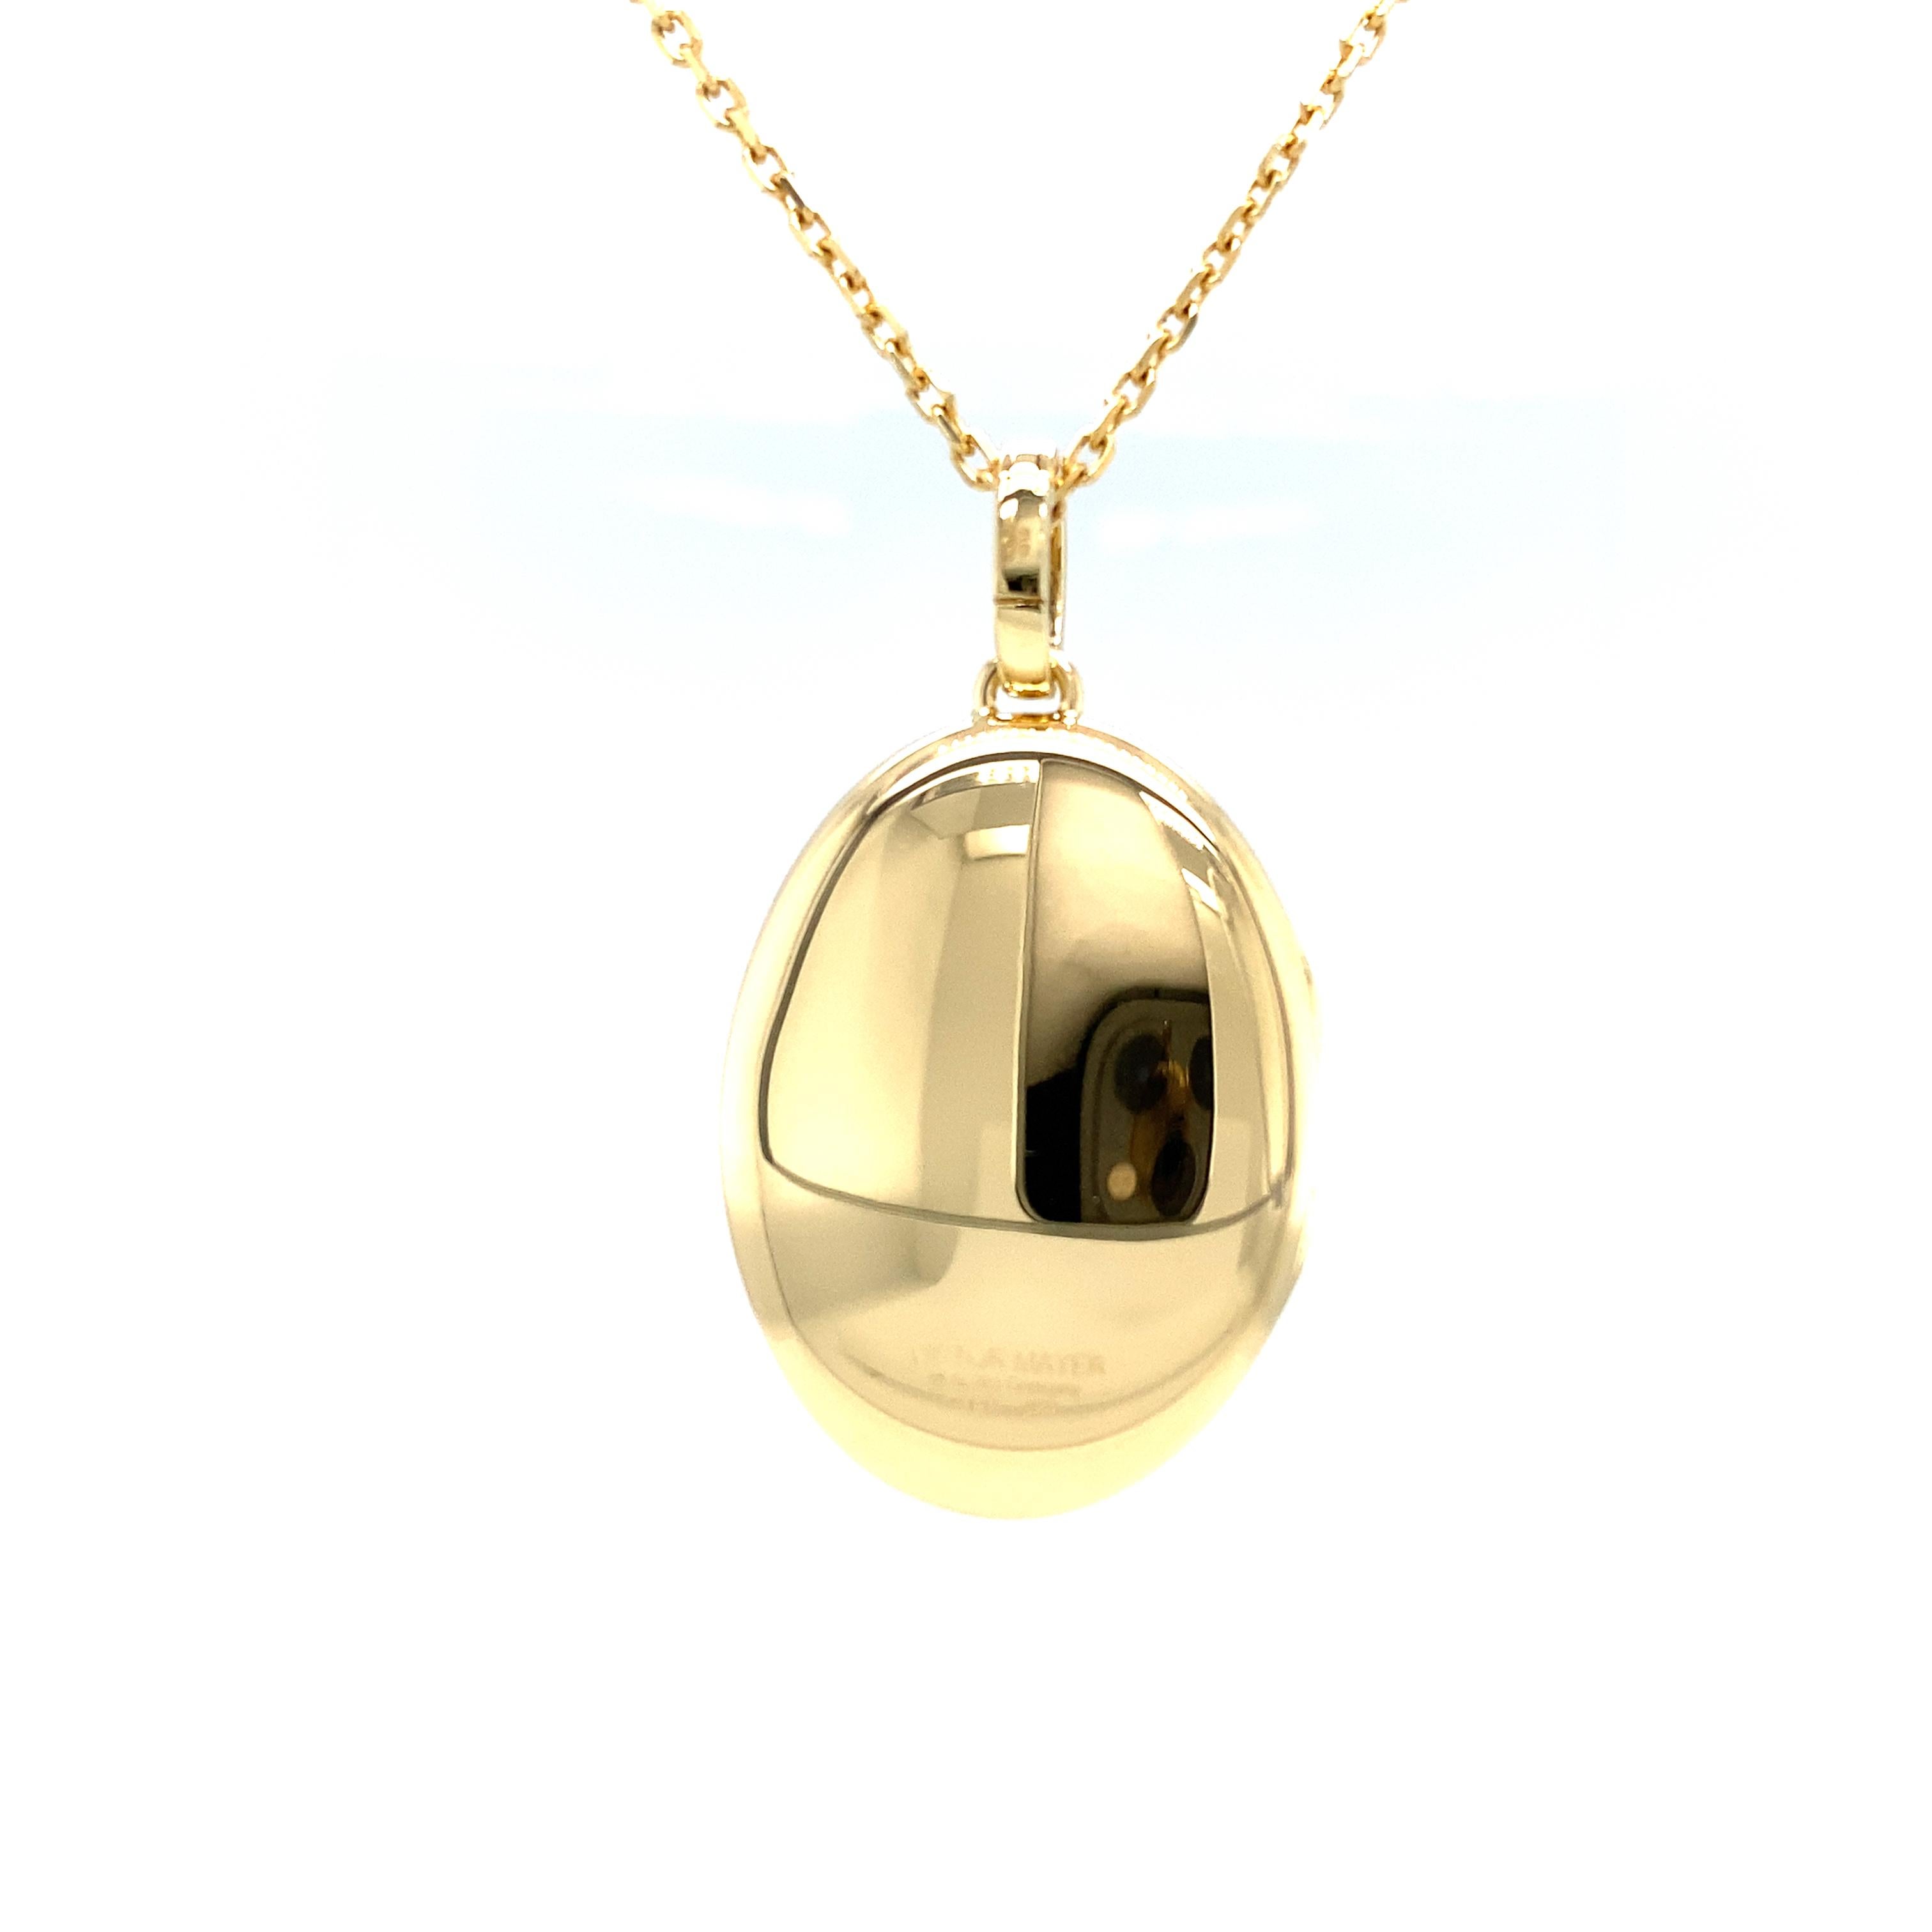 Oval Polished Locket Pendant Necklace - 18k Yellow Gold - 9 Diamonds 0.14ct G VS For Sale 3